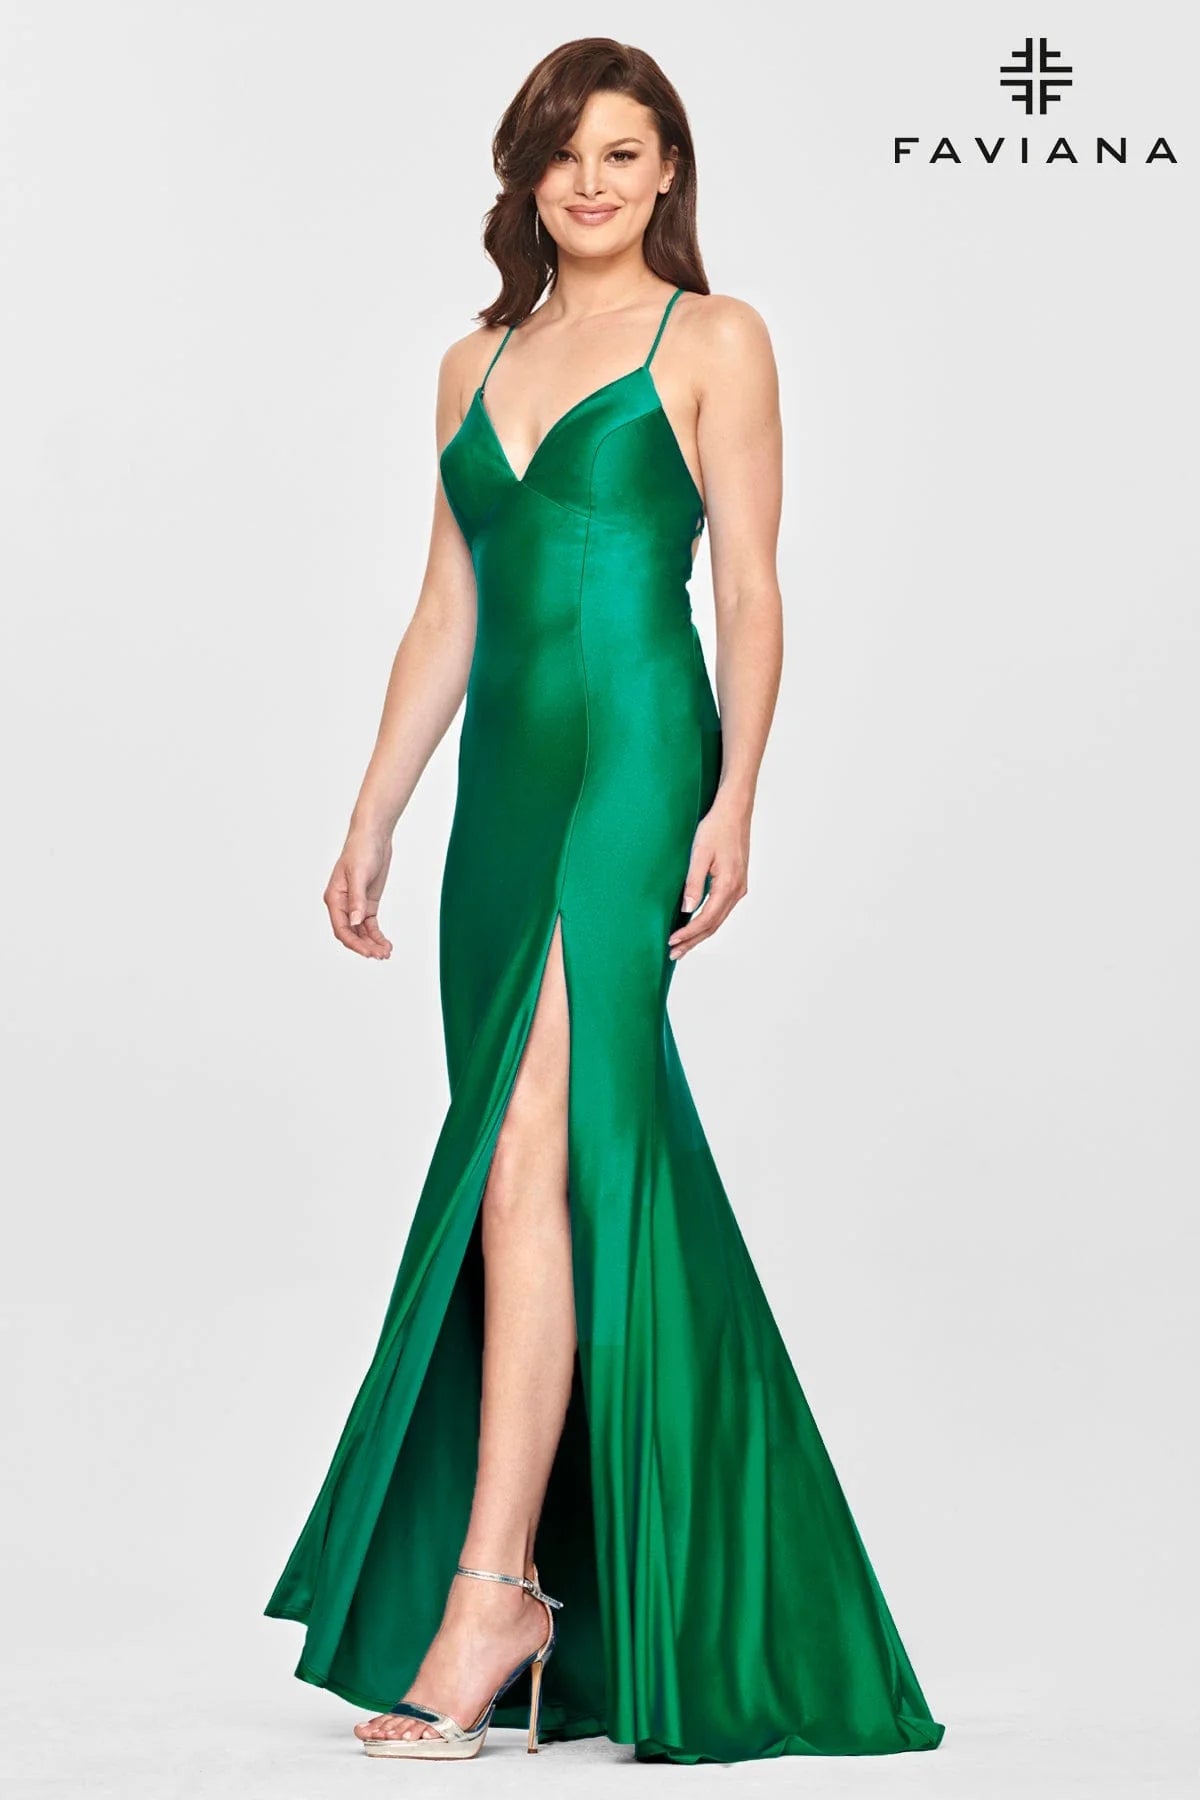 Green V Neckline Prom Dress With Stretch Fabric And Corset Back